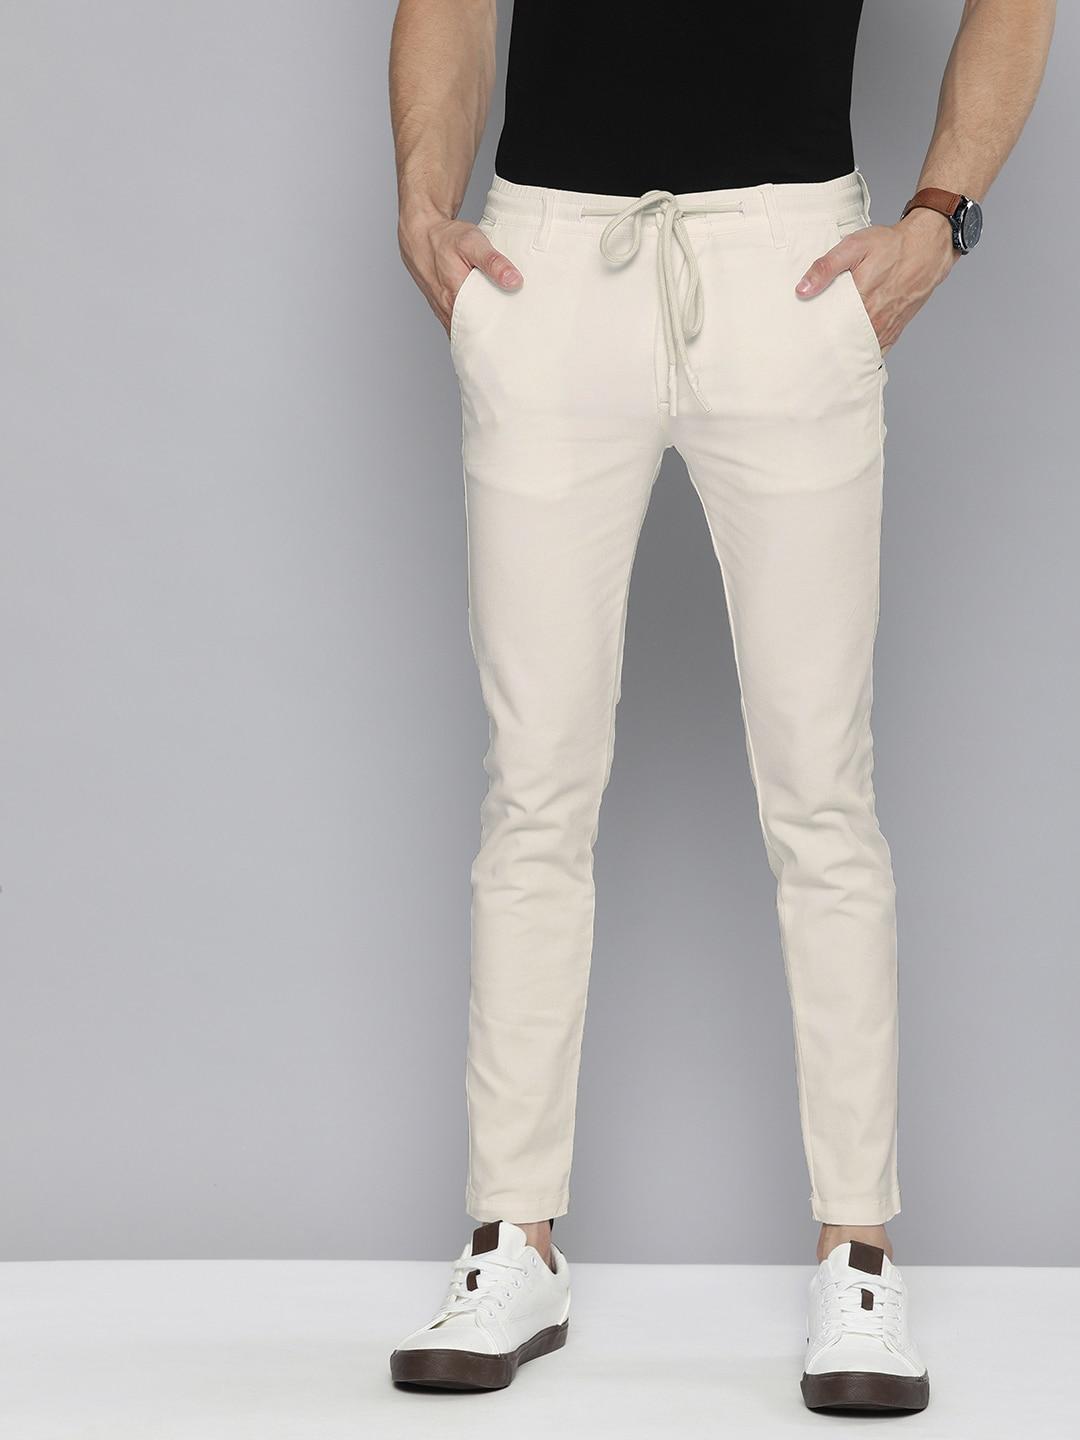 the-indian-garage-co-men-white-slim-fit-chinos-trousers